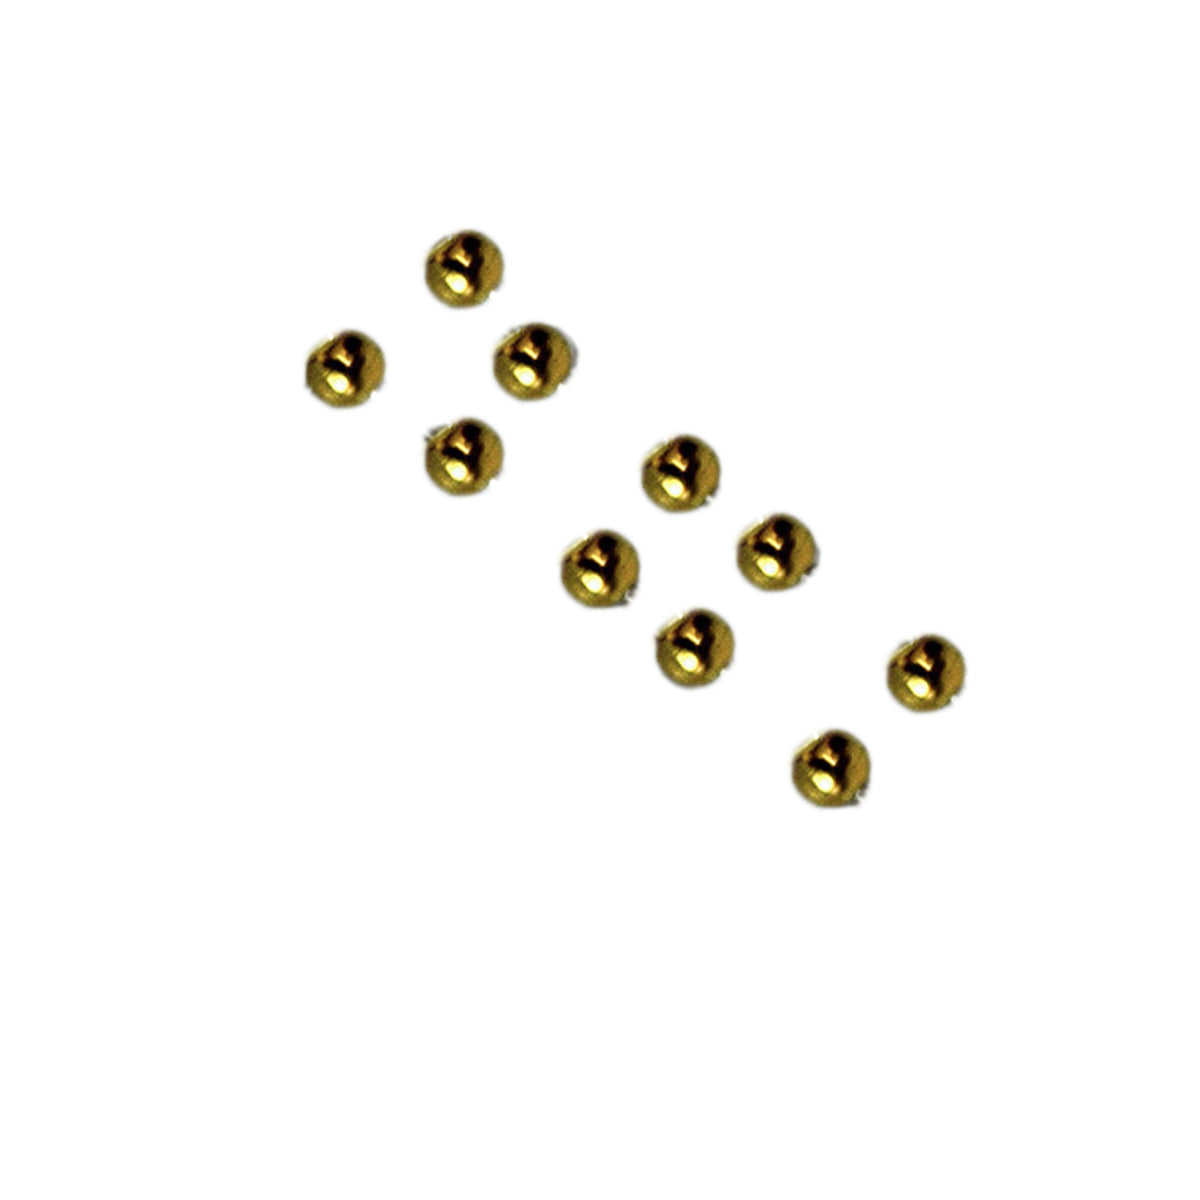 Browse Warrior Hollow Bead 1/8 Polished Brass 10-Pack Tackle HD